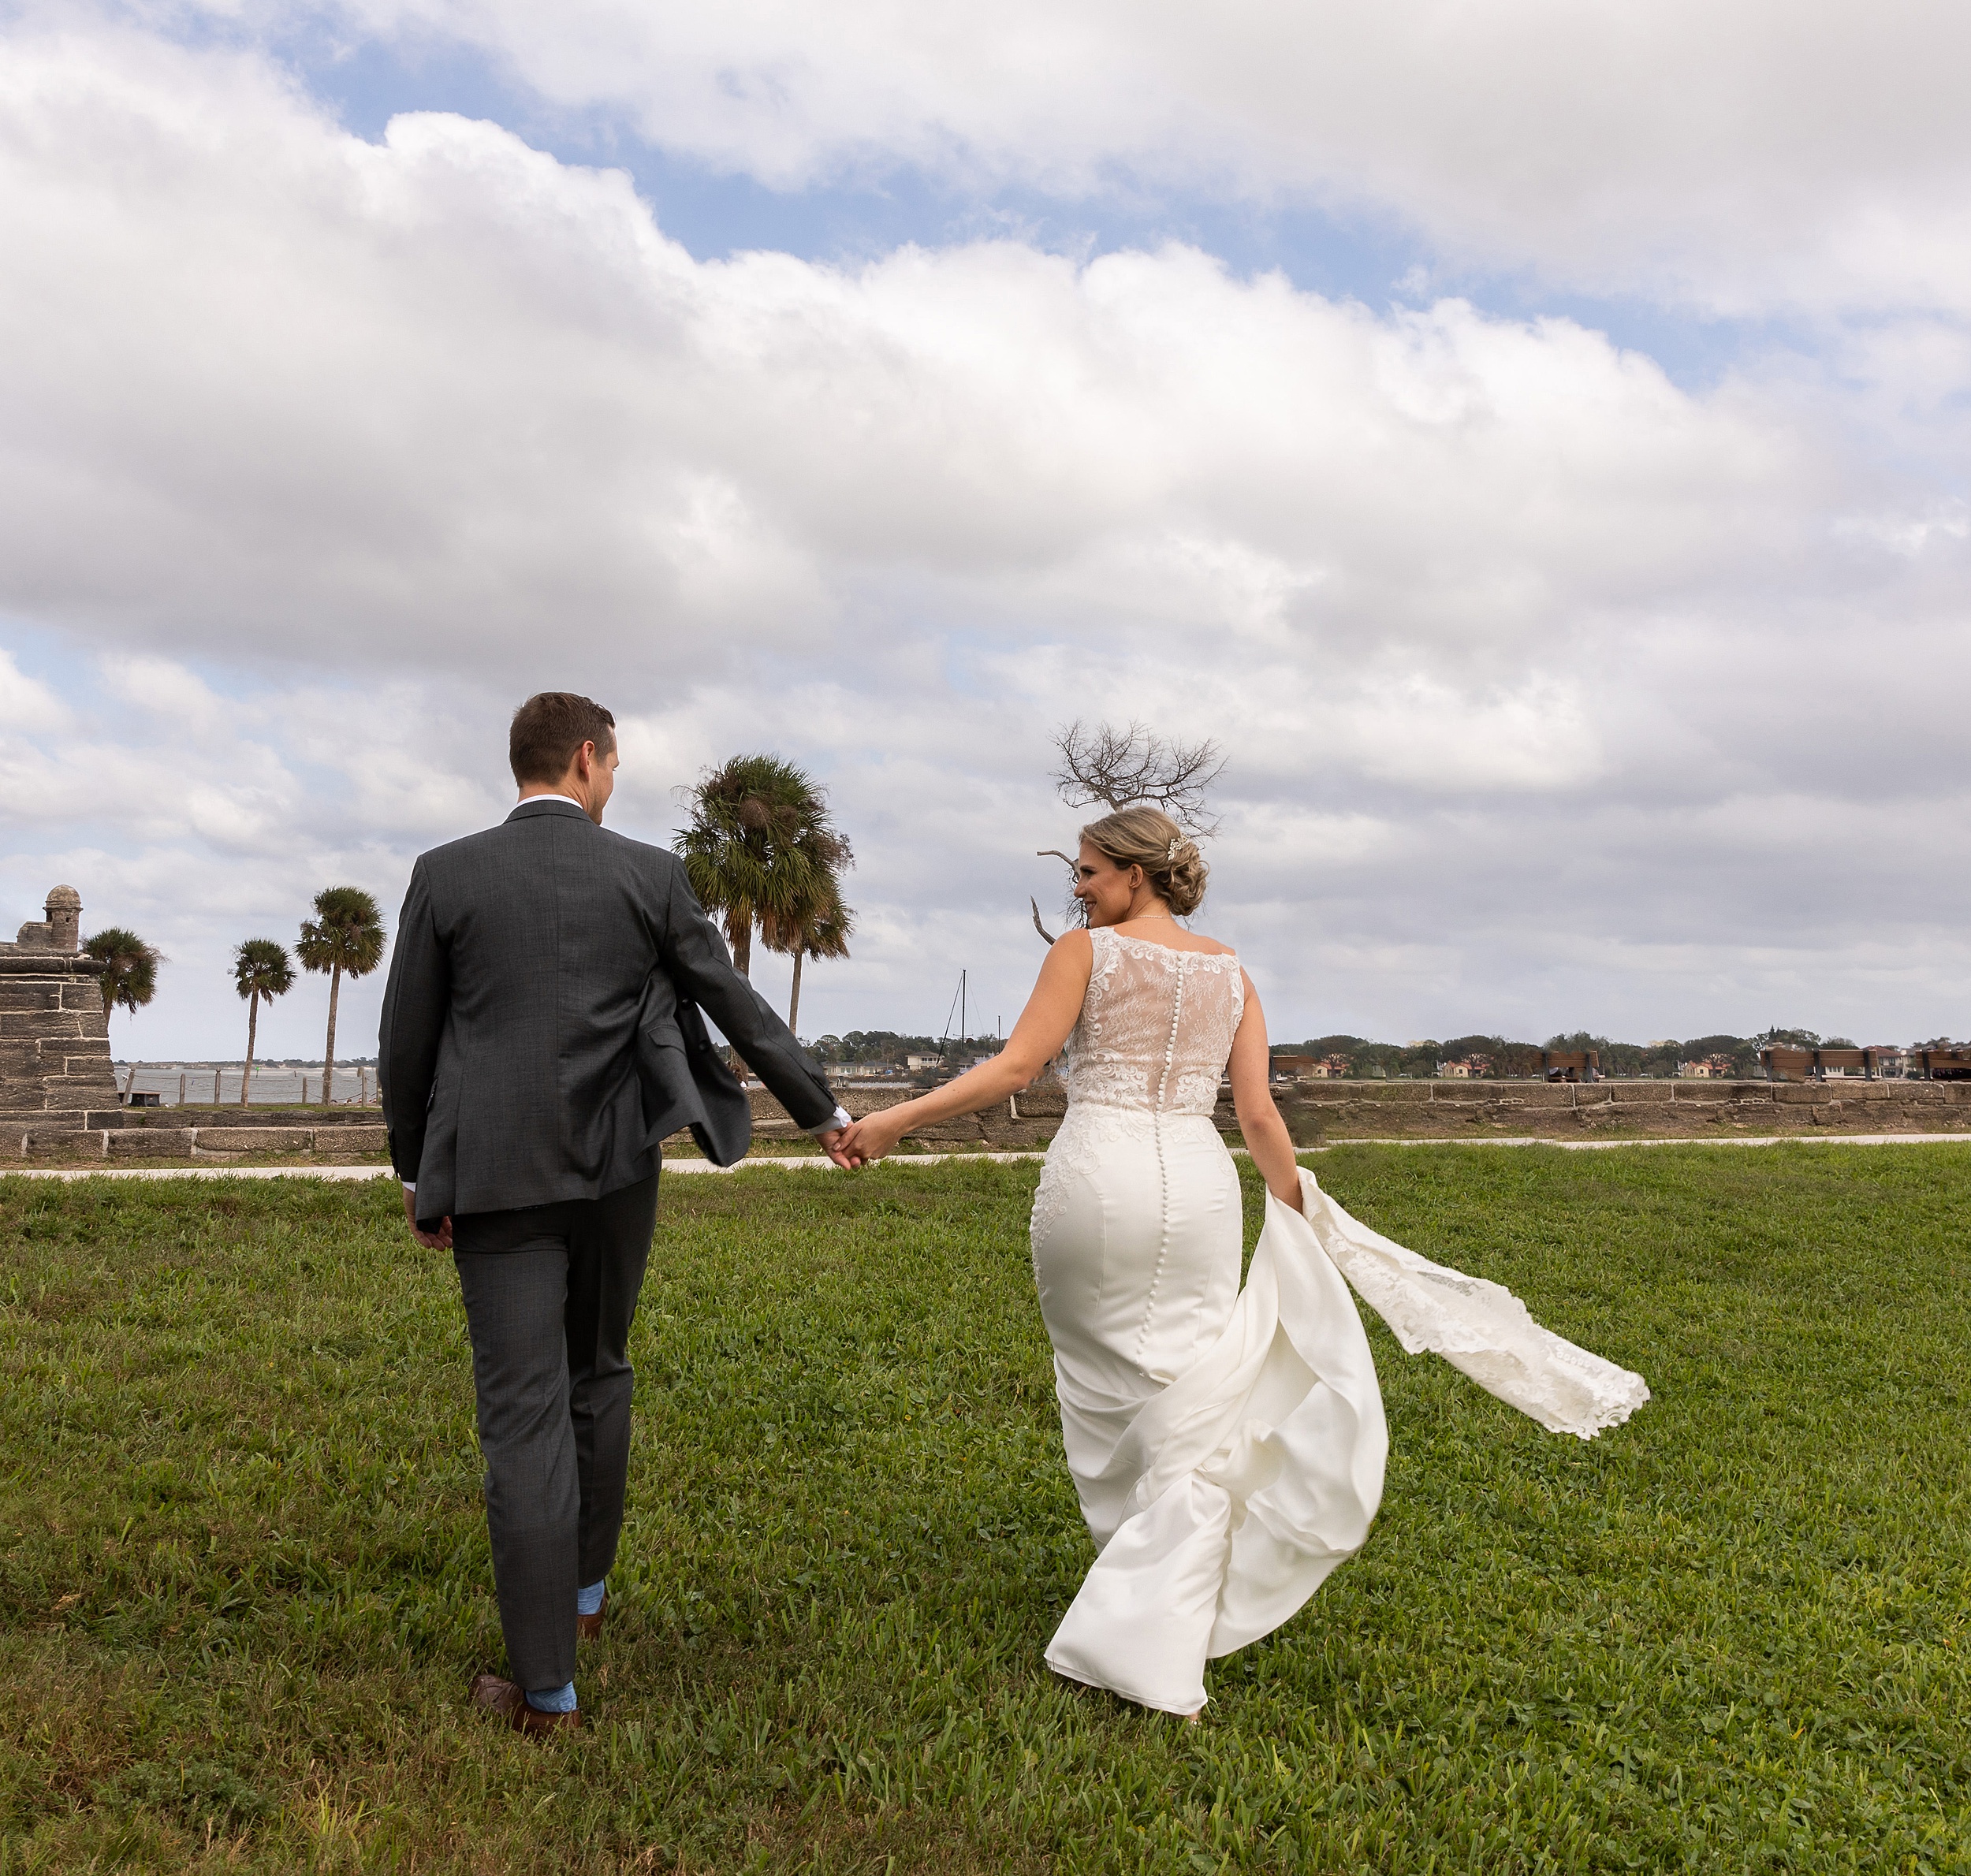 Newlyweds hold hands while walking through a grassy lawn